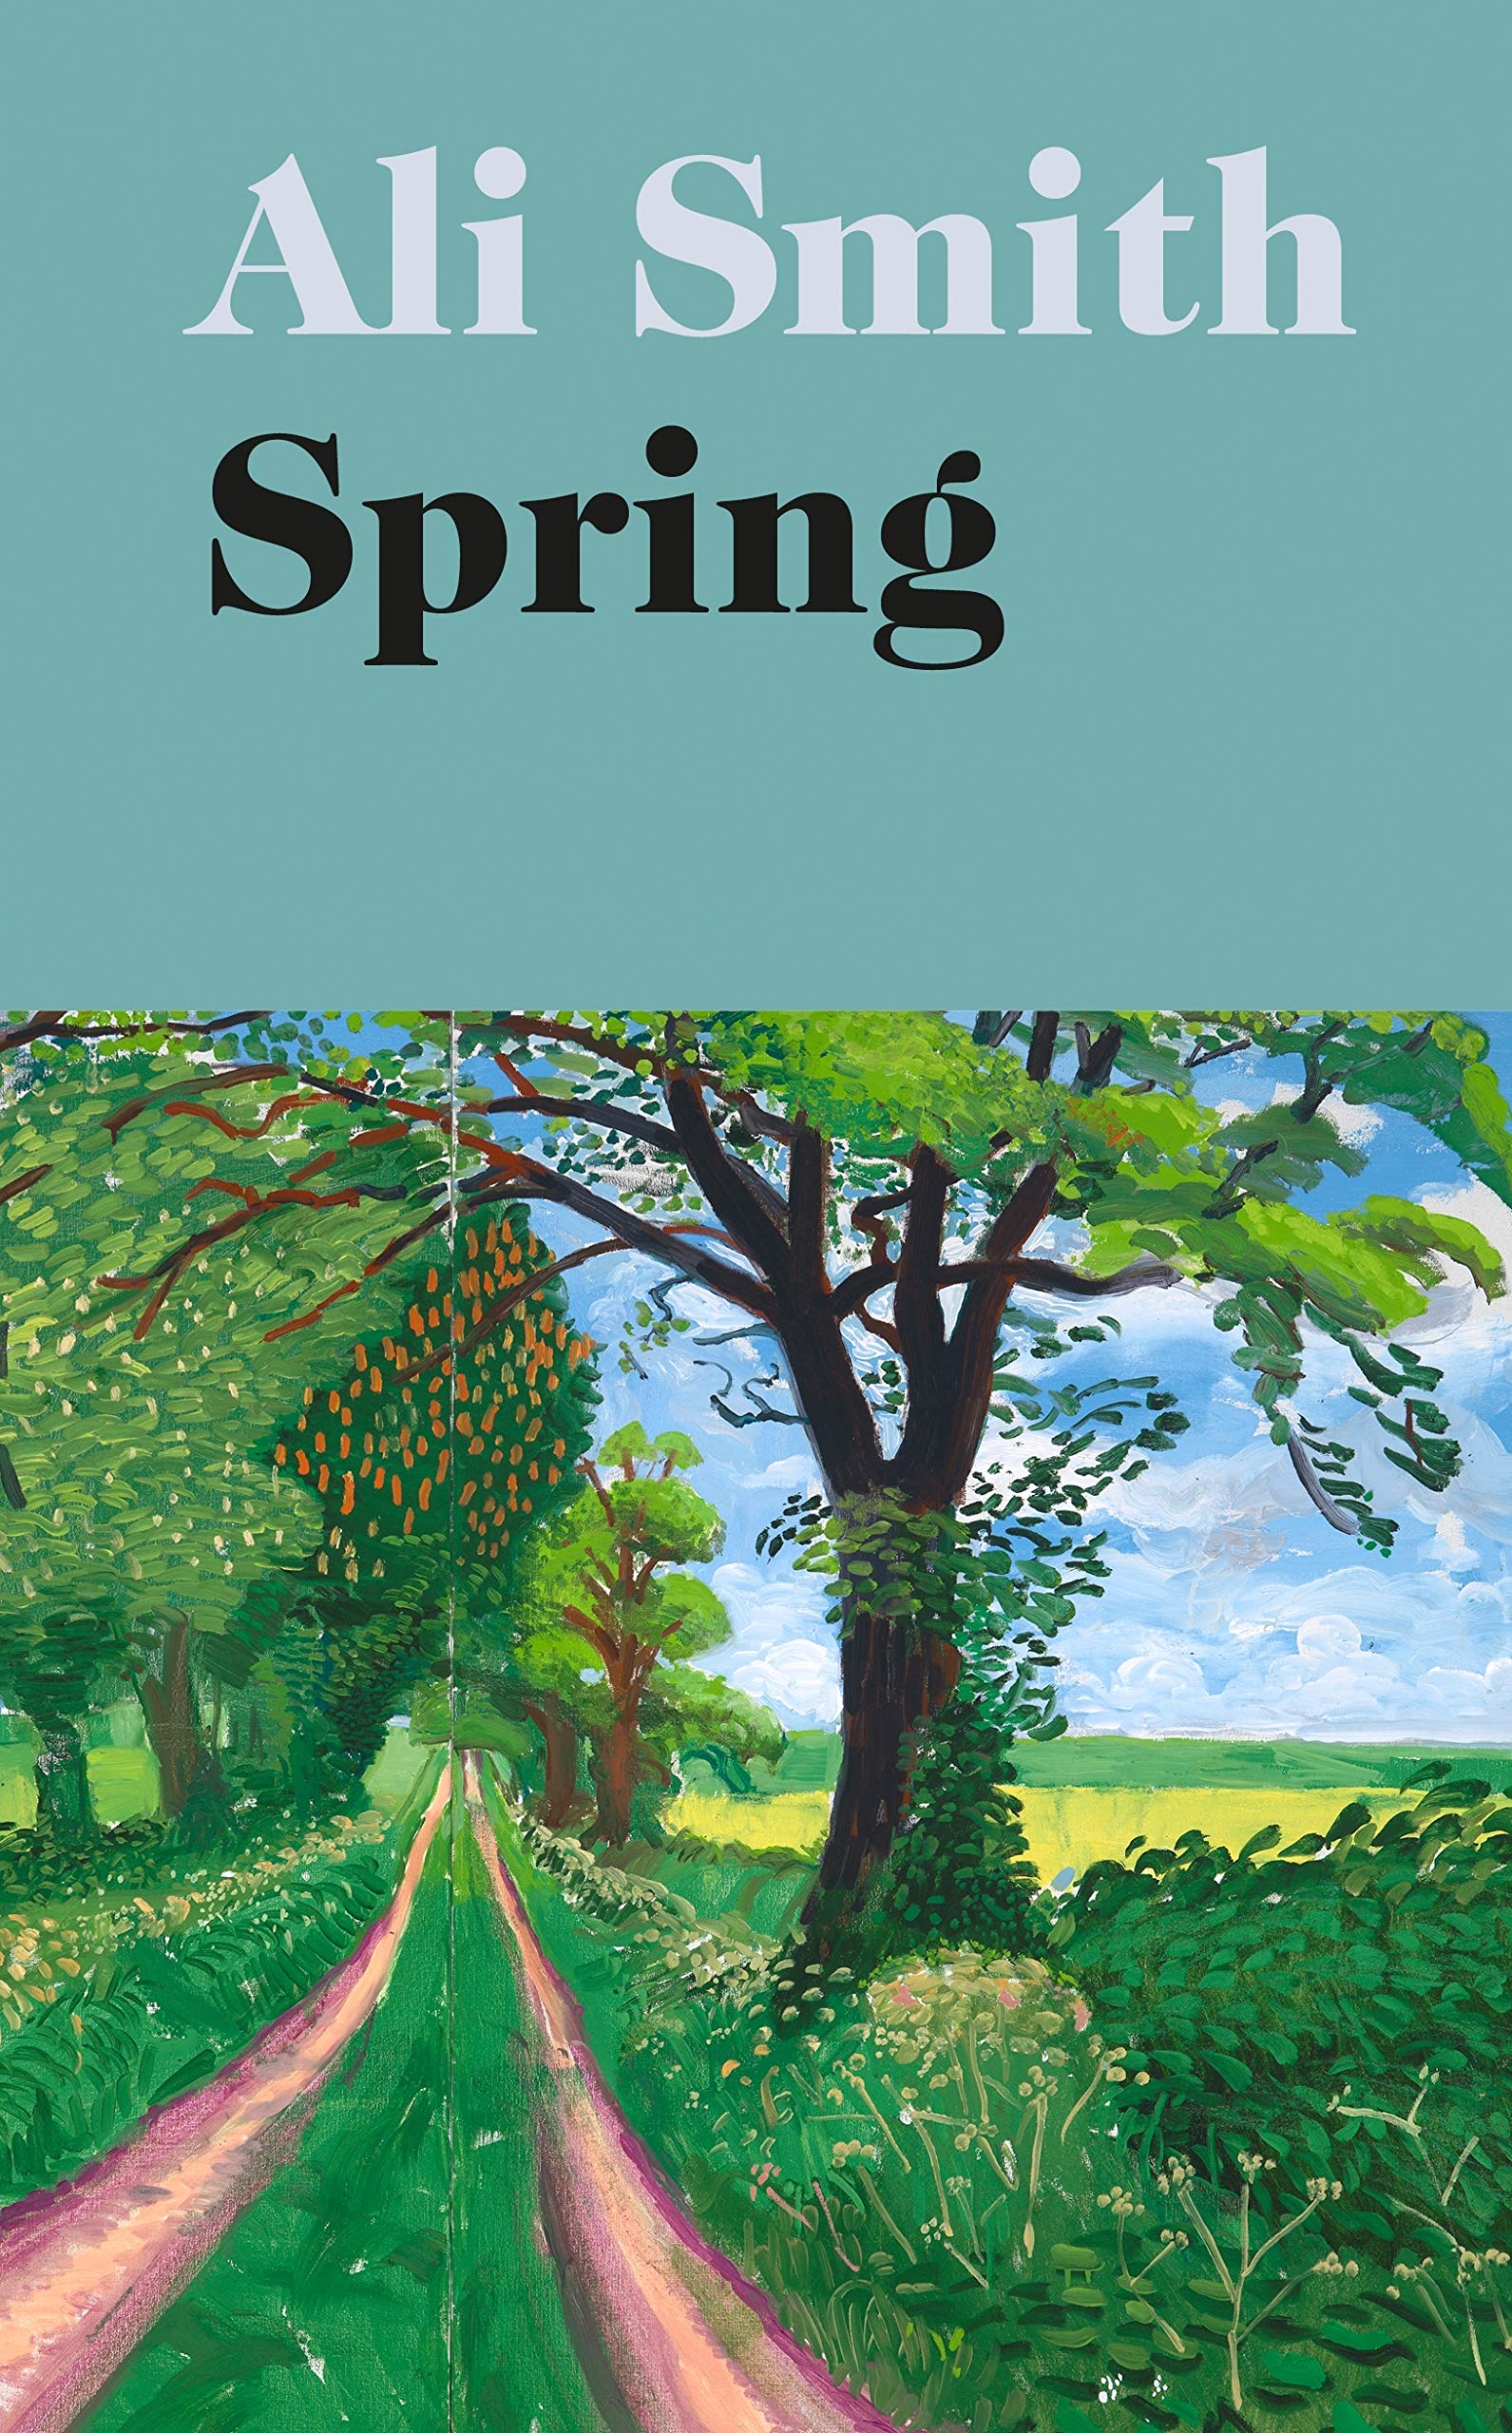 Spring Fiction Book by Ali Smith